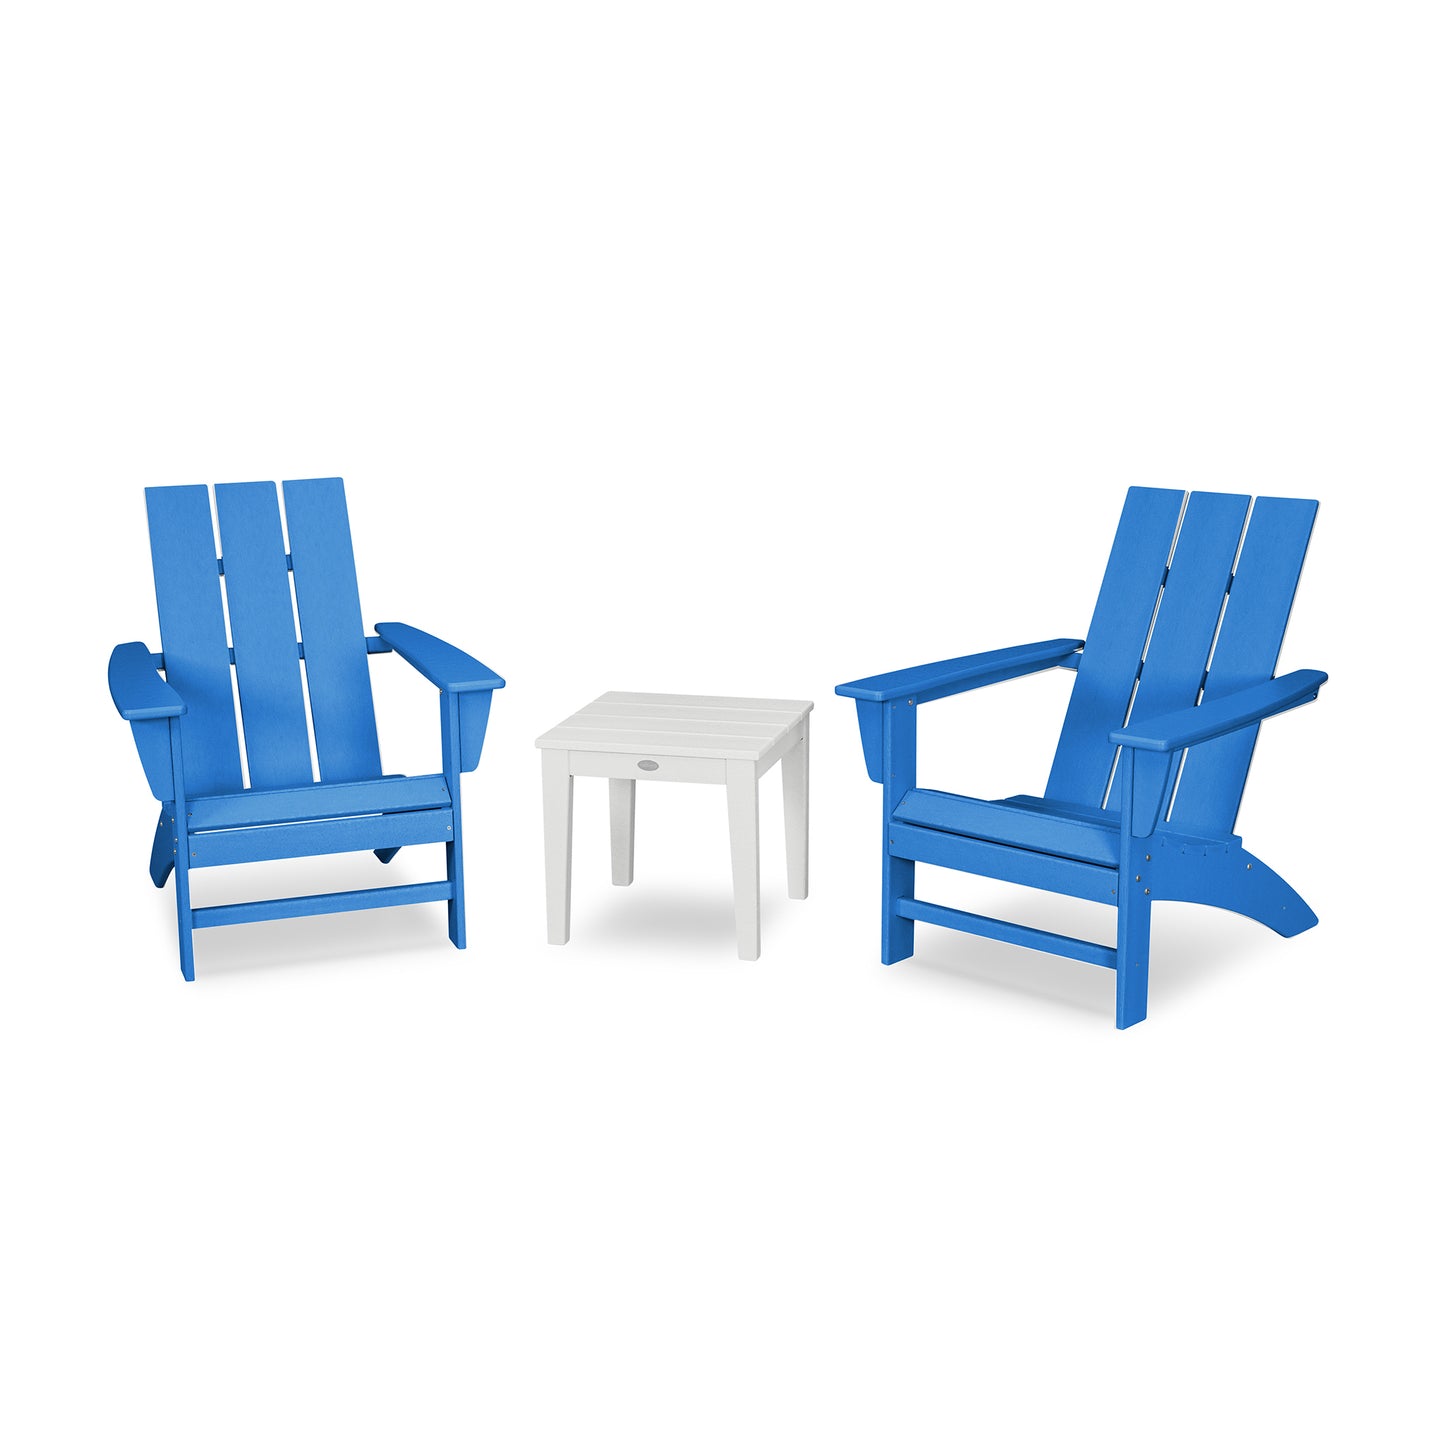 Two bright blue POLYWOOD Modern Adirondack chairs facing each other with a small white square table between them, all placed on a plain white background.